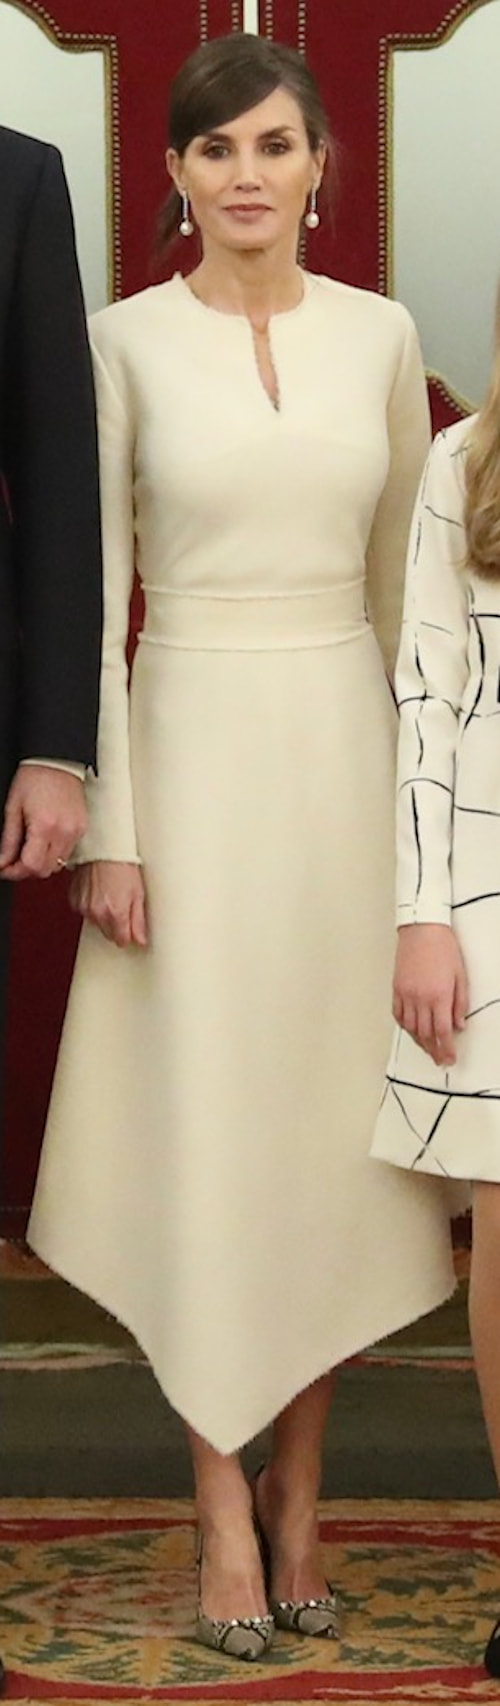 Queen Letizia wears cream long-sleeve dress featuring an asymmetrical hemline and frayed finishes